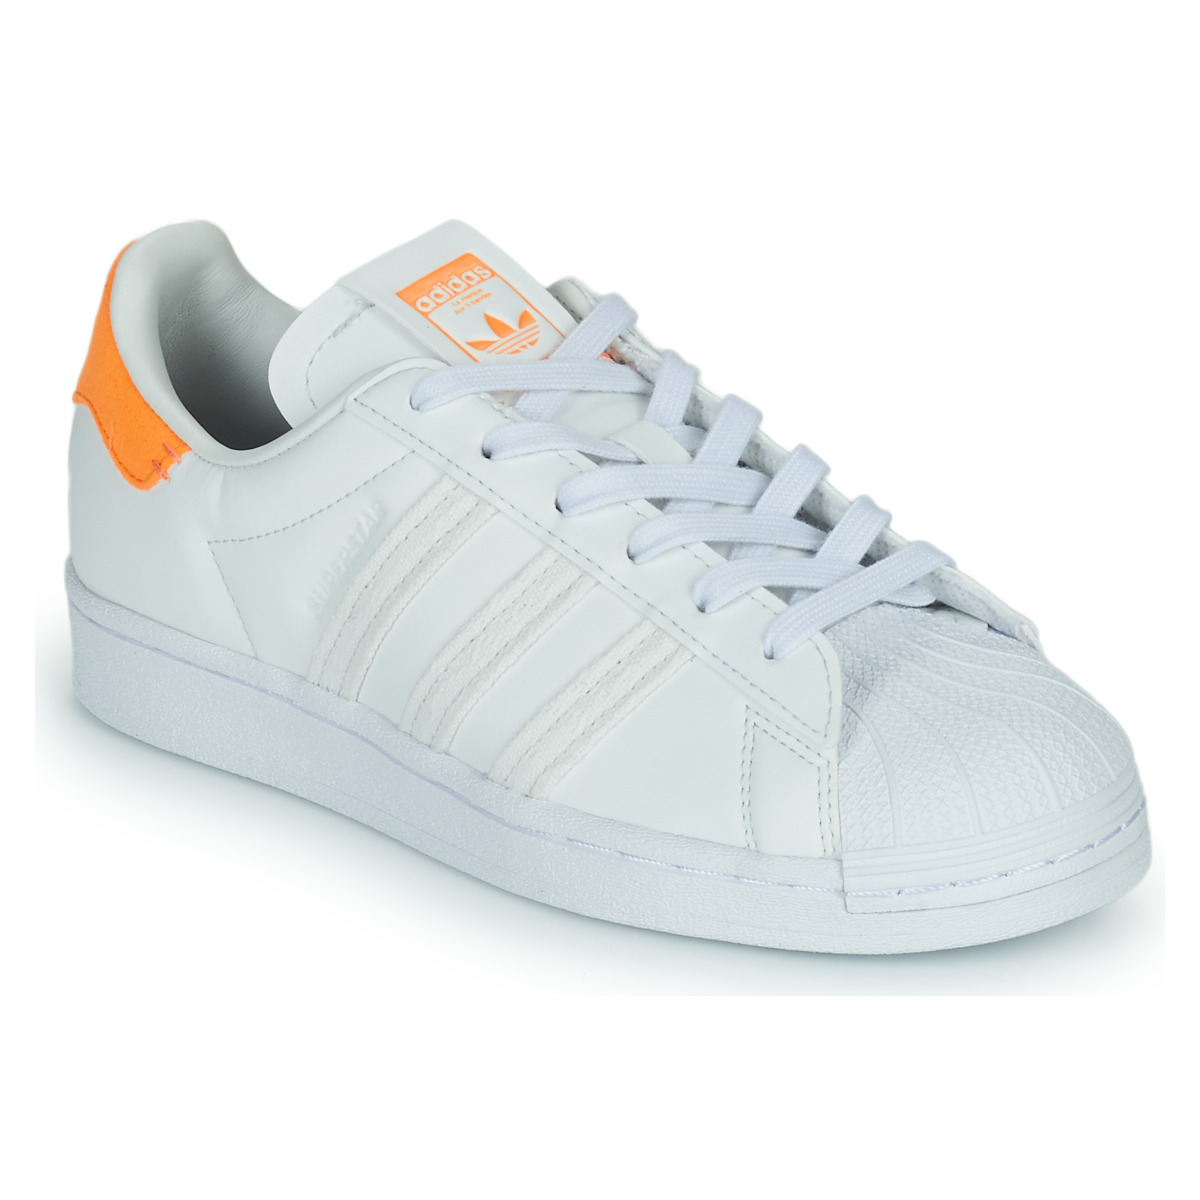 adidas Originals SUPERSTAR W White / Orange - Free delivery | Spartoo NET !  - Shoes Low top trainers Women